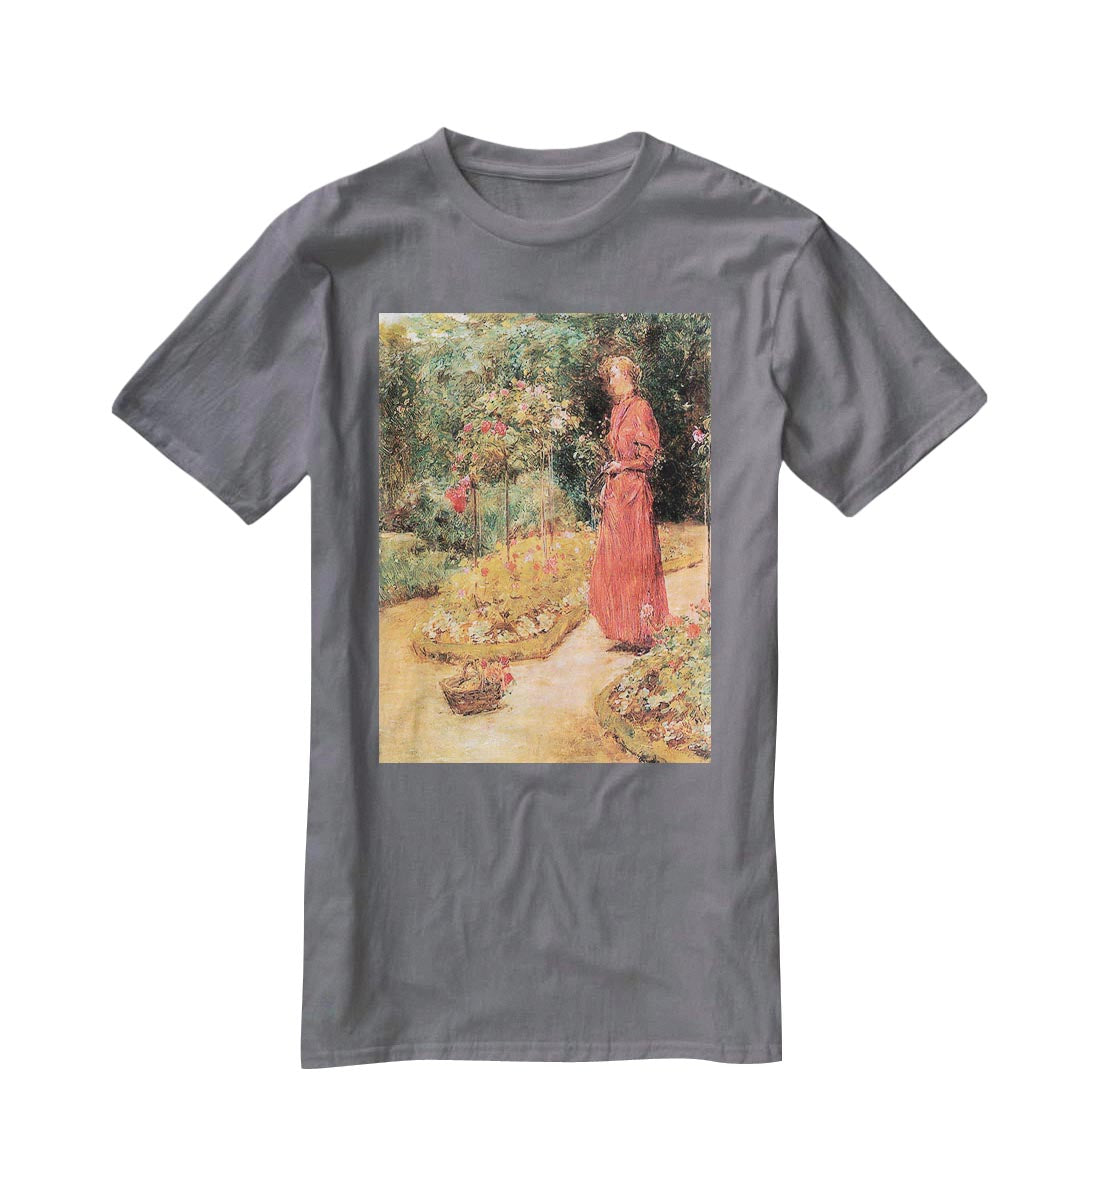 Woman cuts roses in a garden by Hassam T-Shirt - Canvas Art Rocks - 3